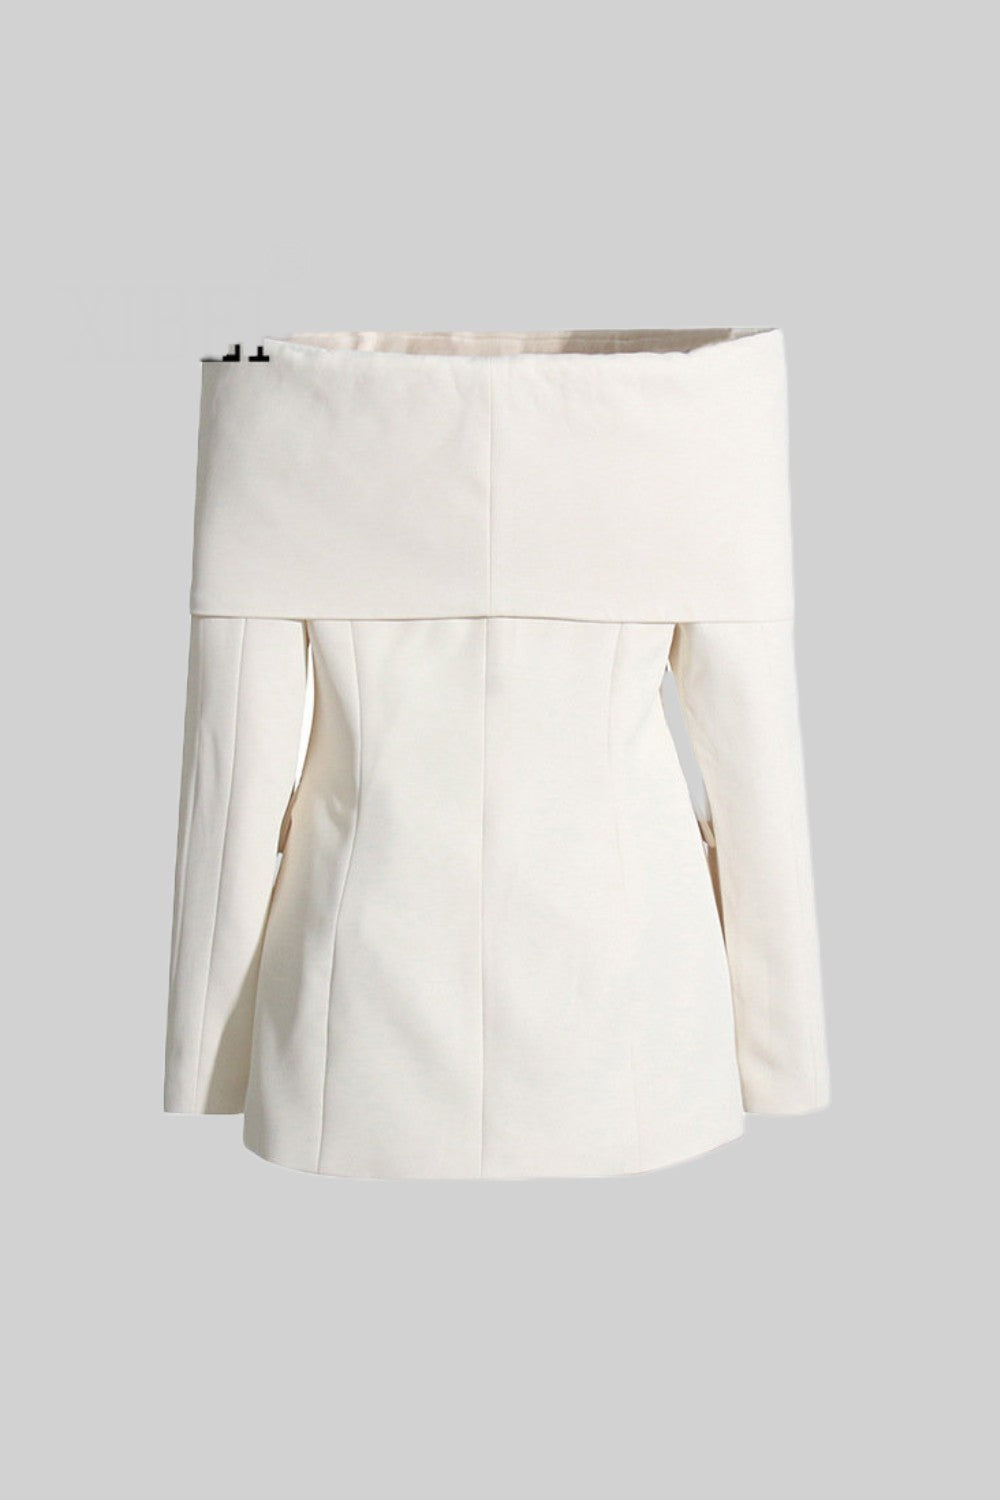 Two Piece Elegant Suit with Metal Details - White